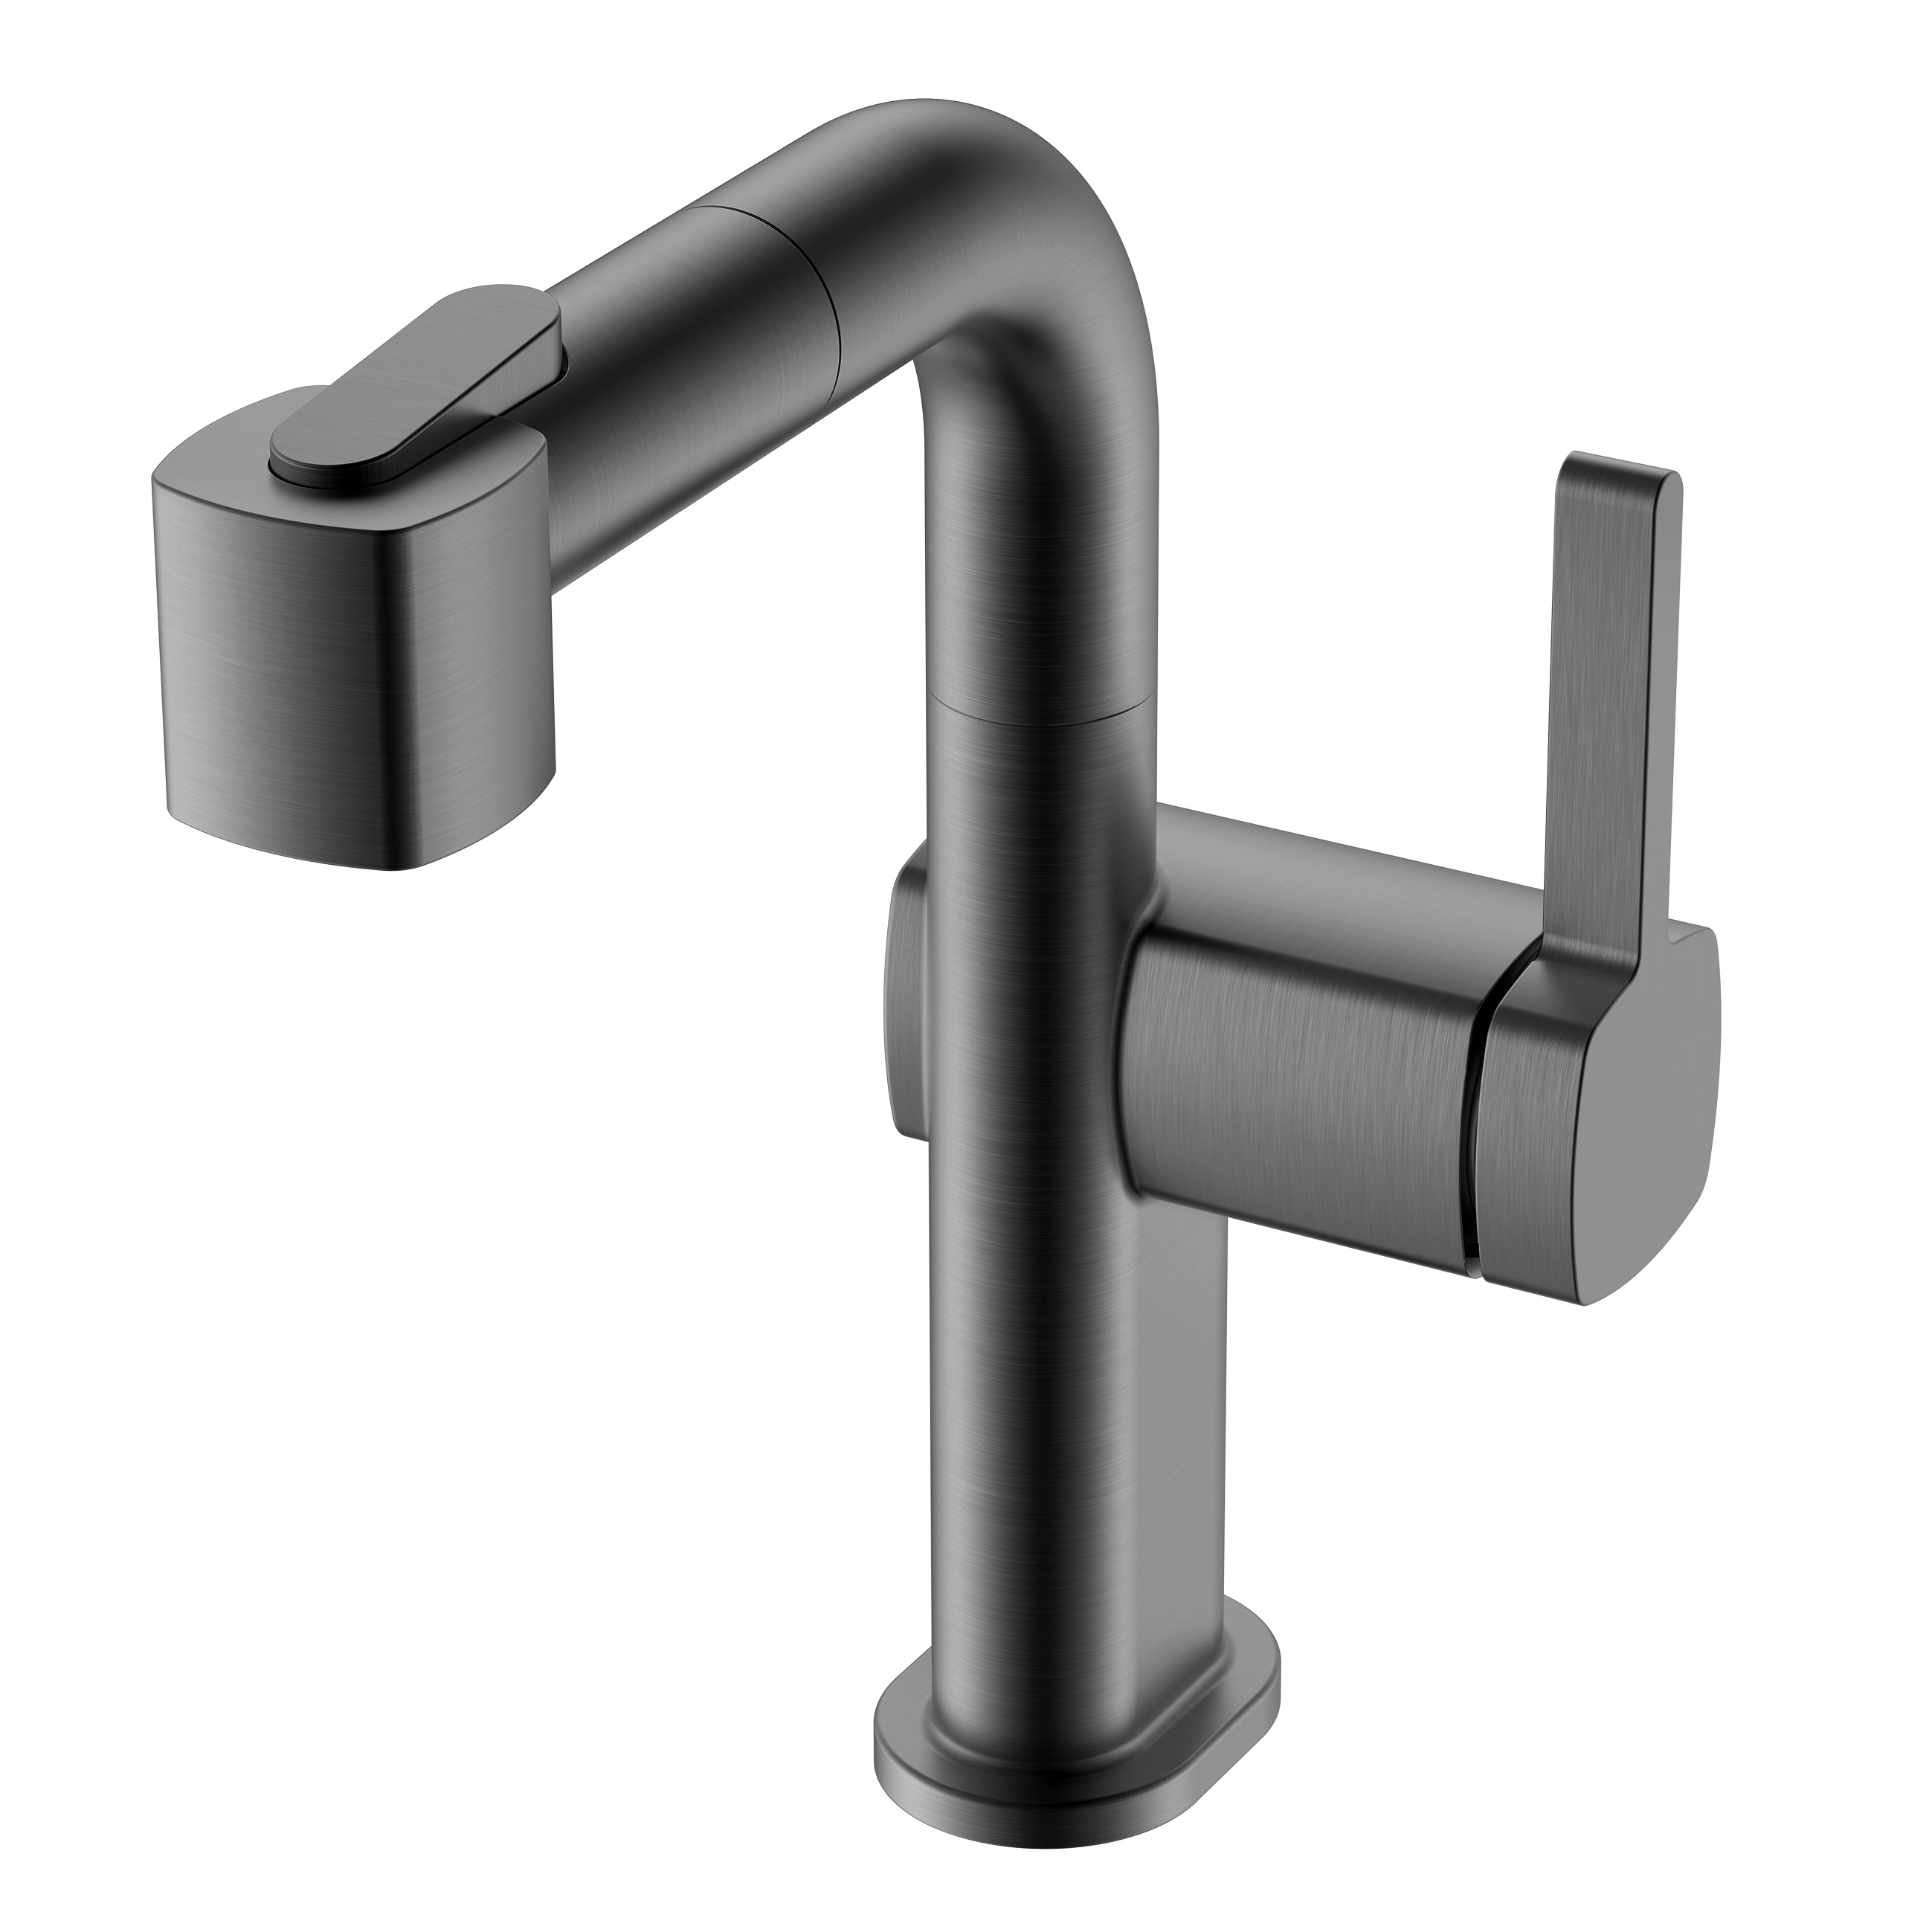 The Exquisite World of Single Hole Bathroom Faucets: Matte Black & Waterfall Designs